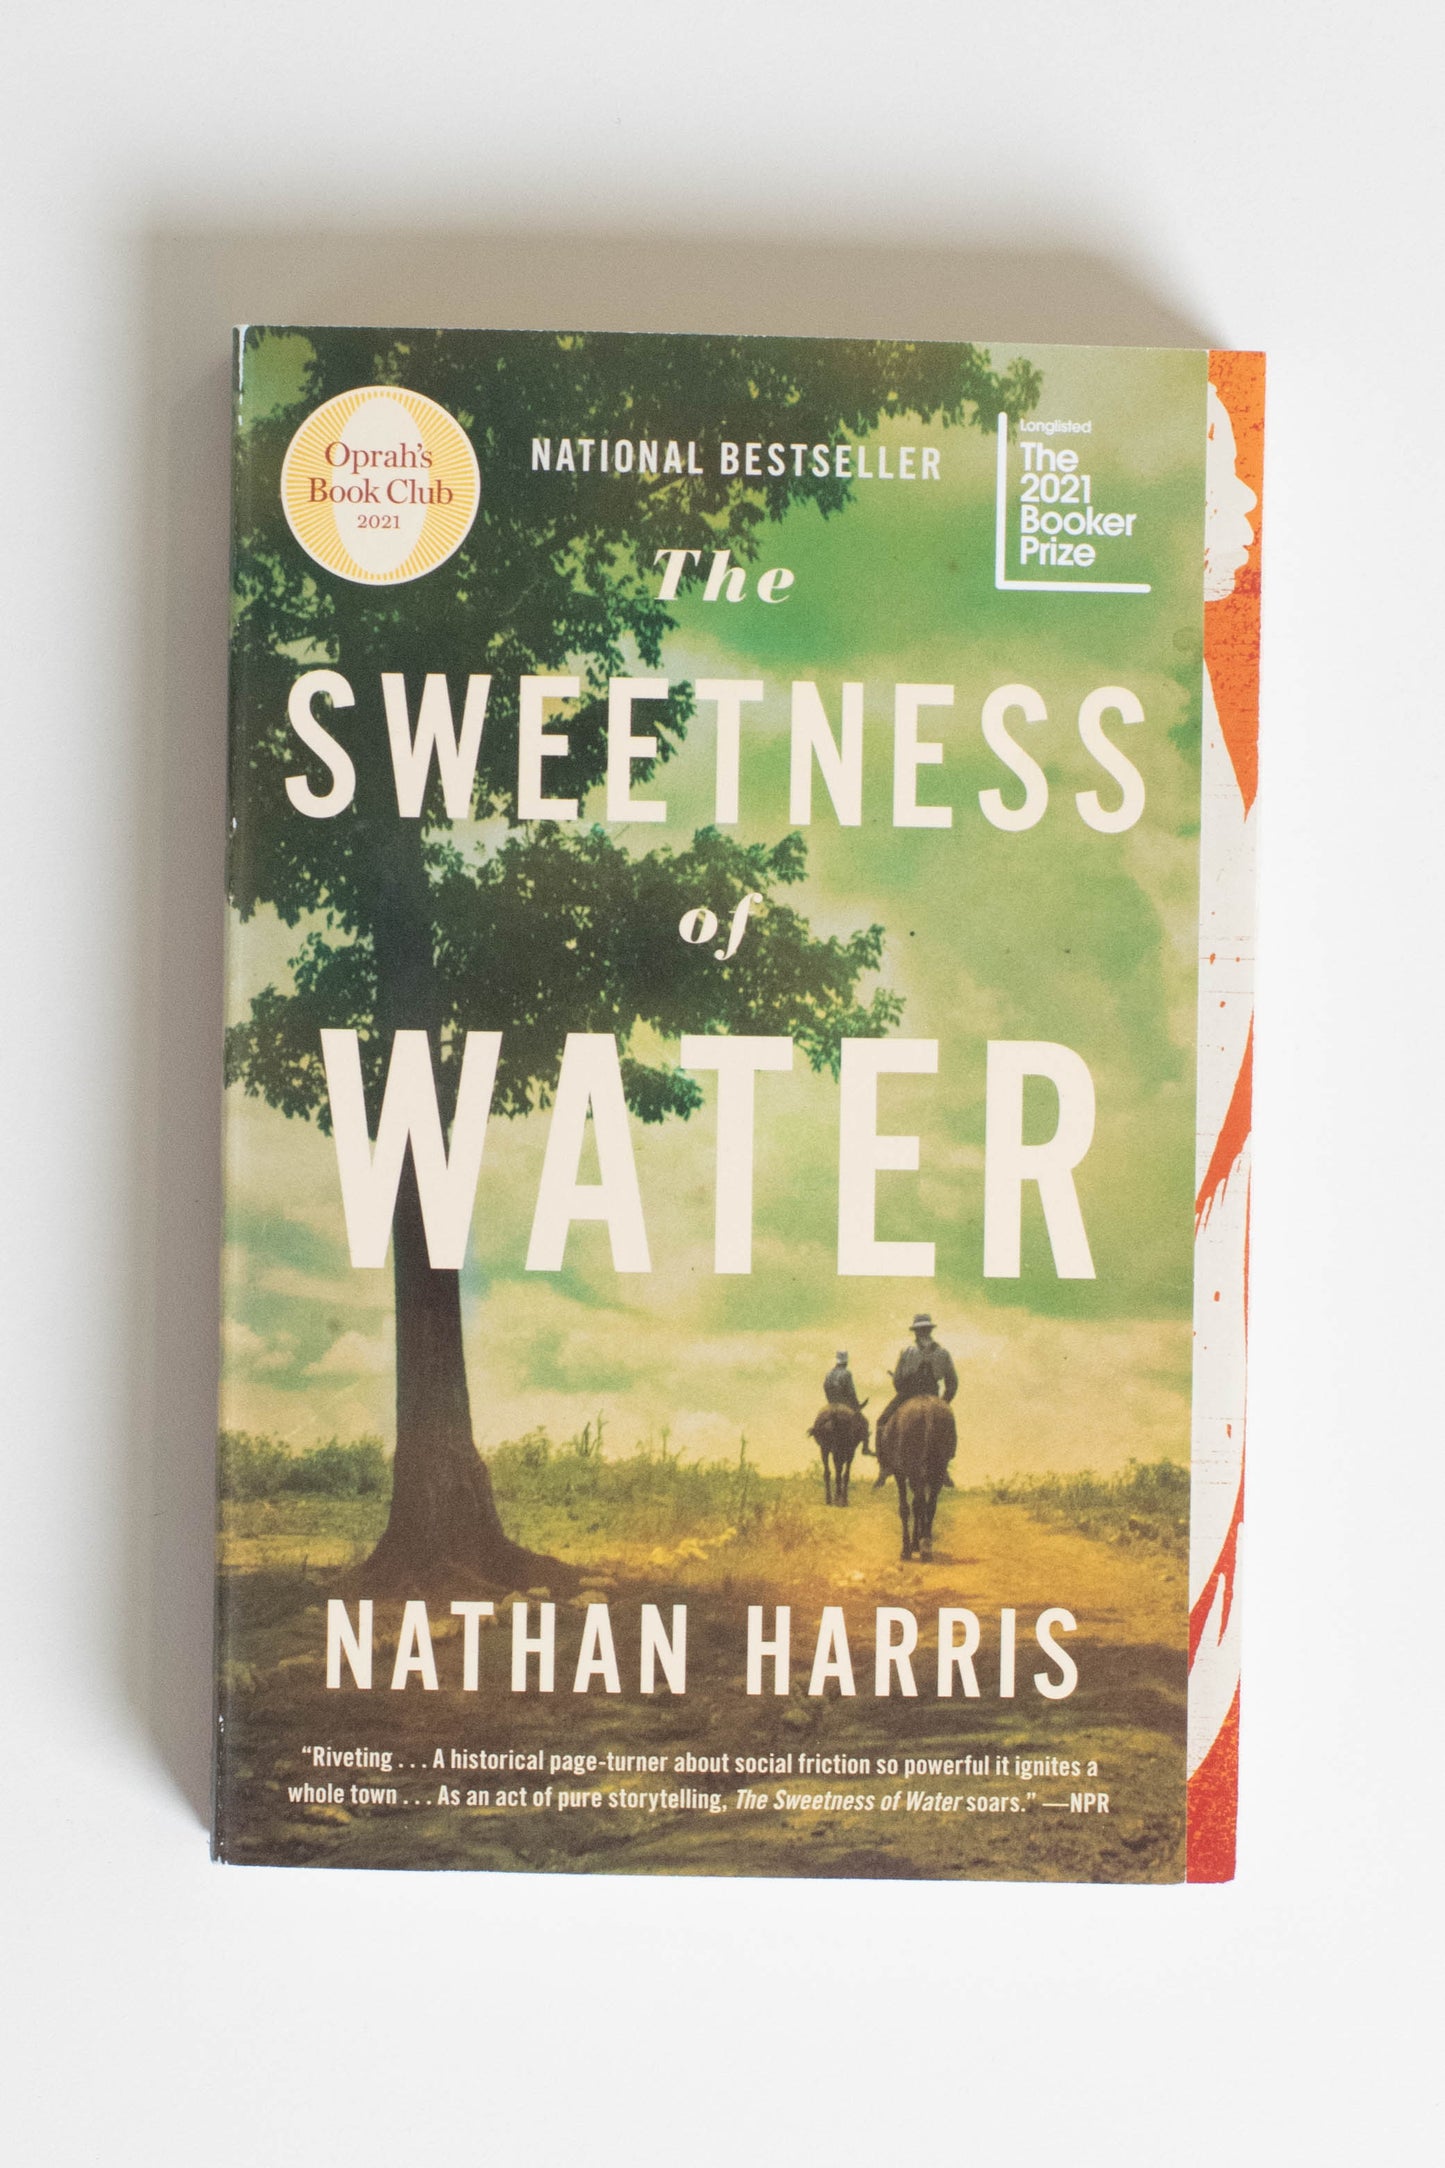 The Sweetness of Water (Oprah's Book Club): A Novel